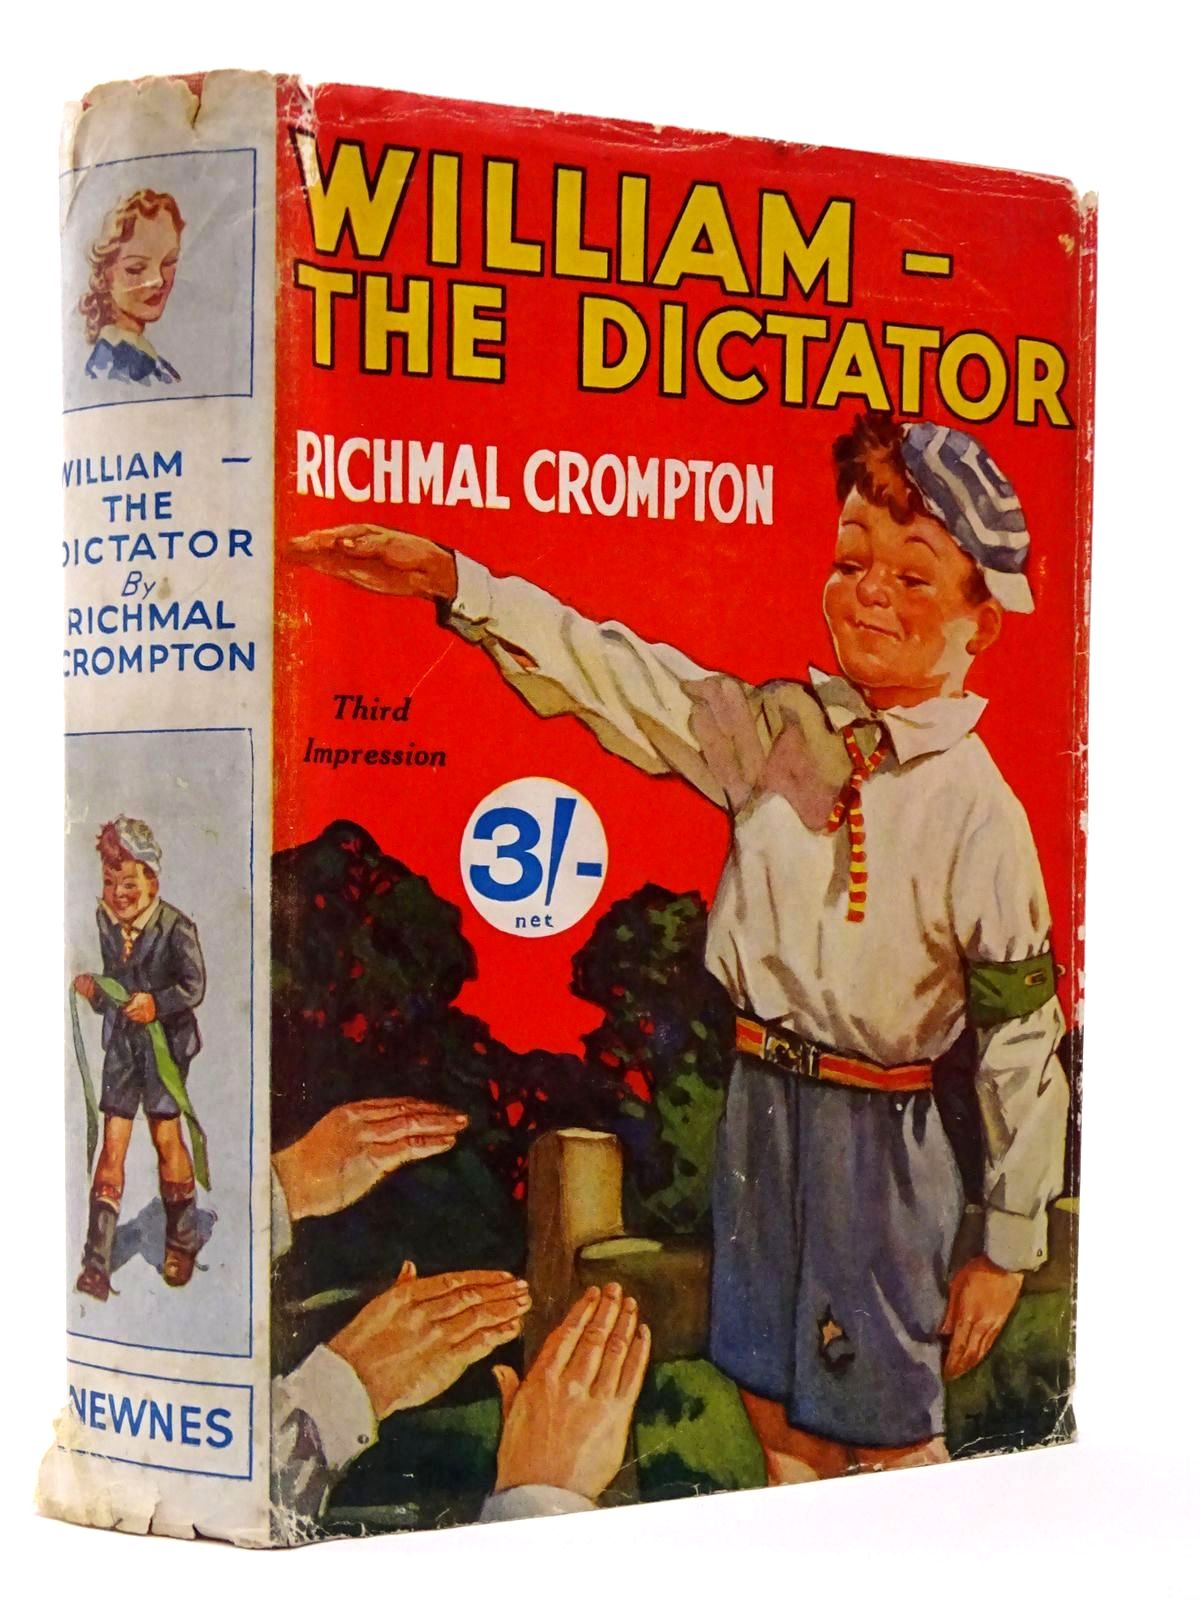 Photo of WILLIAM-THE DICTATOR written by Crompton, Richmal illustrated by Henry, Thomas published by George Newnes Ltd. (STOCK CODE: 2129475)  for sale by Stella & Rose's Books